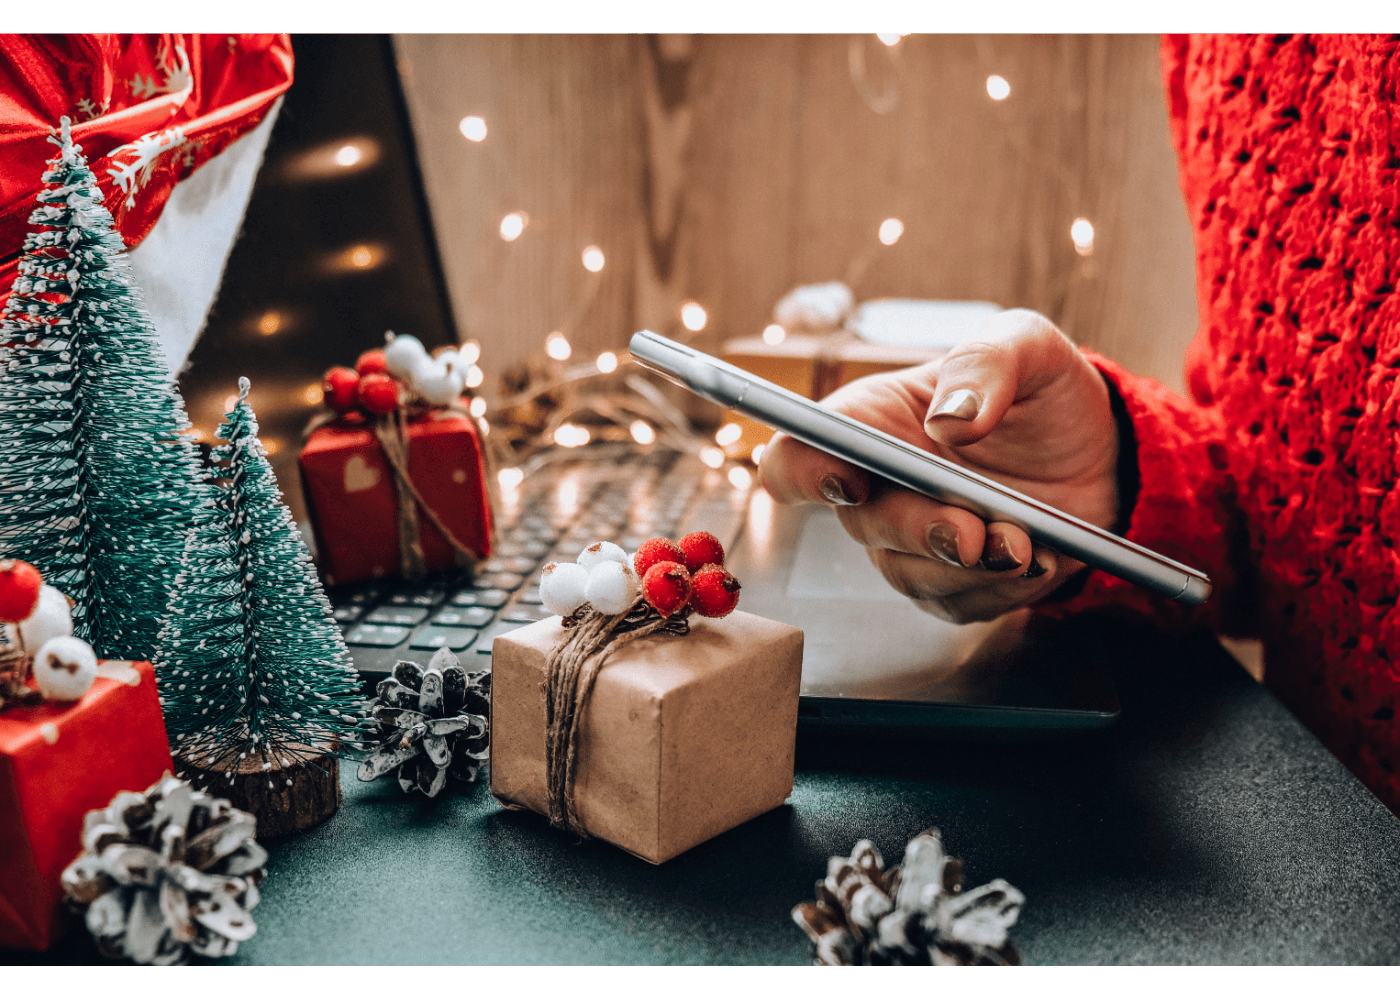 How to Prepare for Seasonal Changes in Holiday Spending with Prepaid Cards